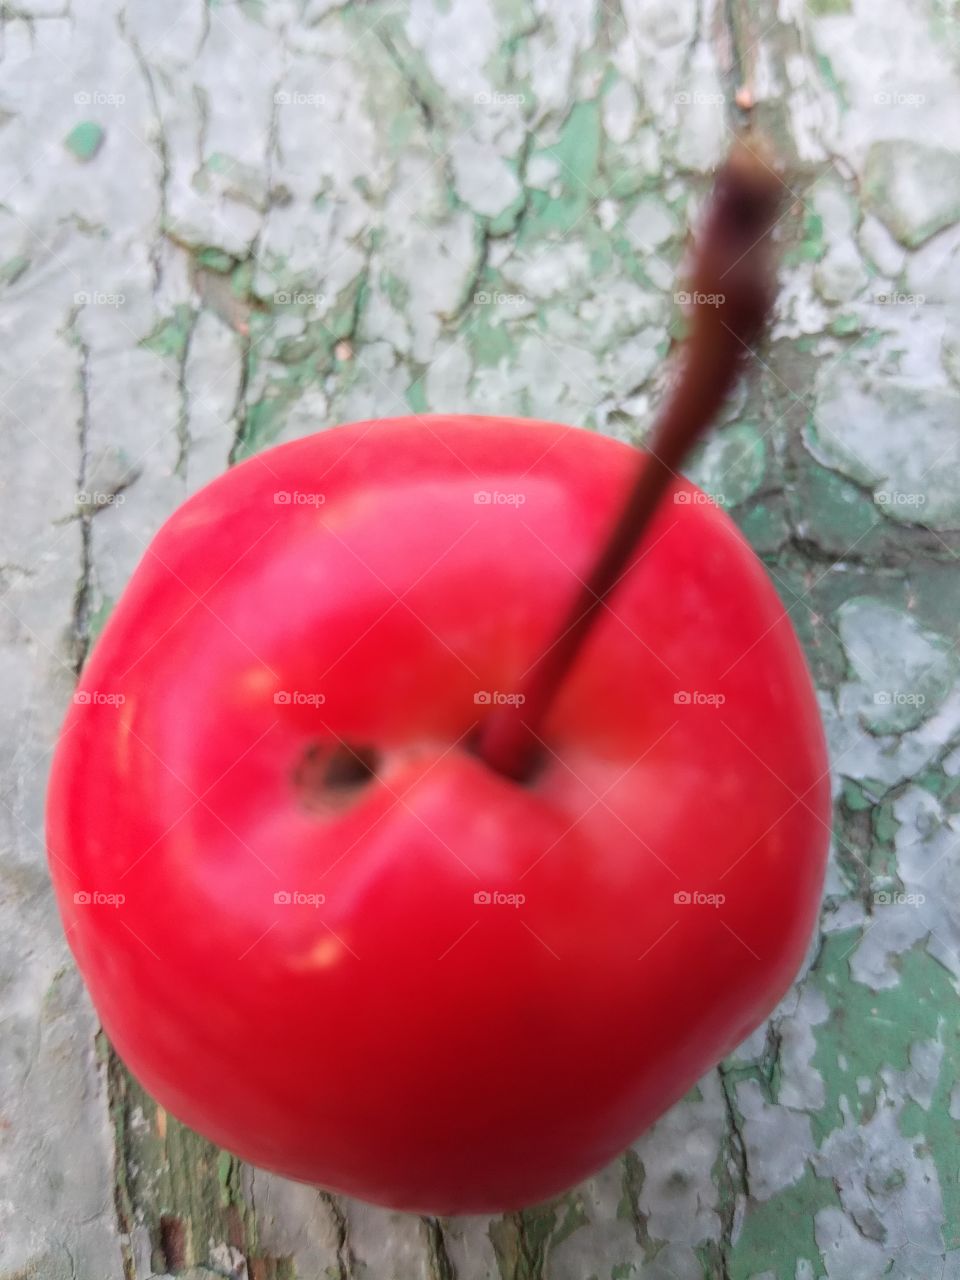 Small red apple 1